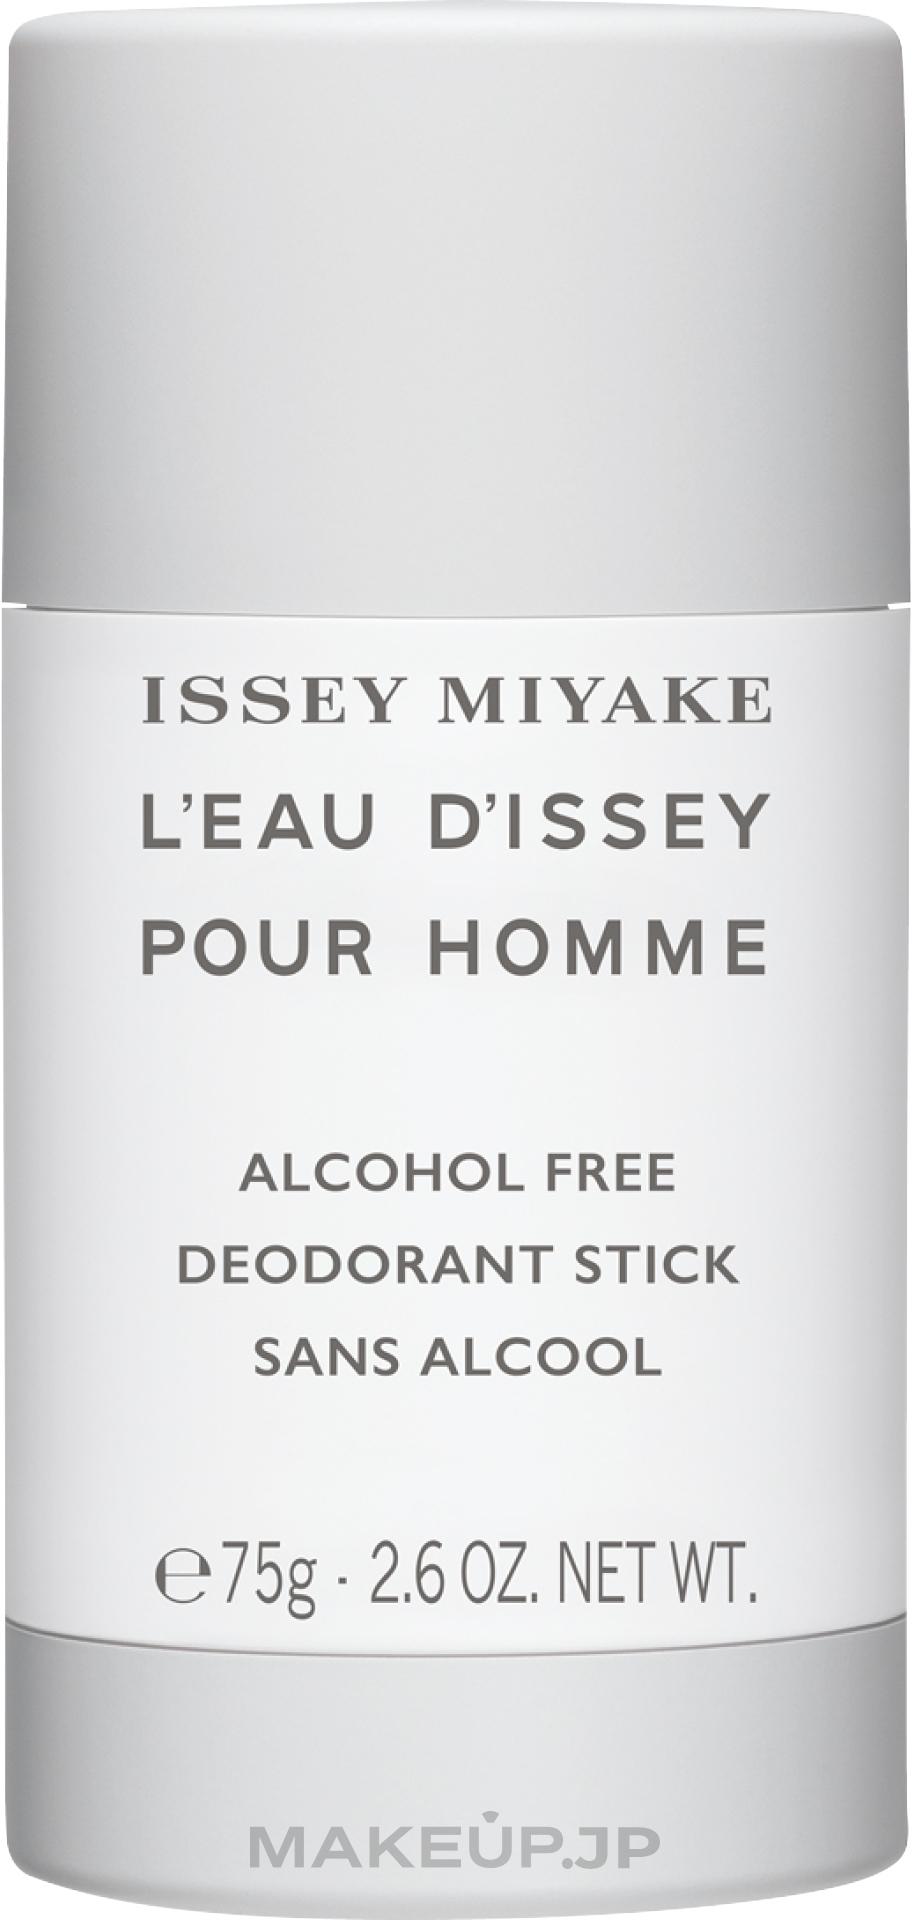 Issey Miyake Leau Dissey pour homme - Deodorant-Stick — photo 75 ml